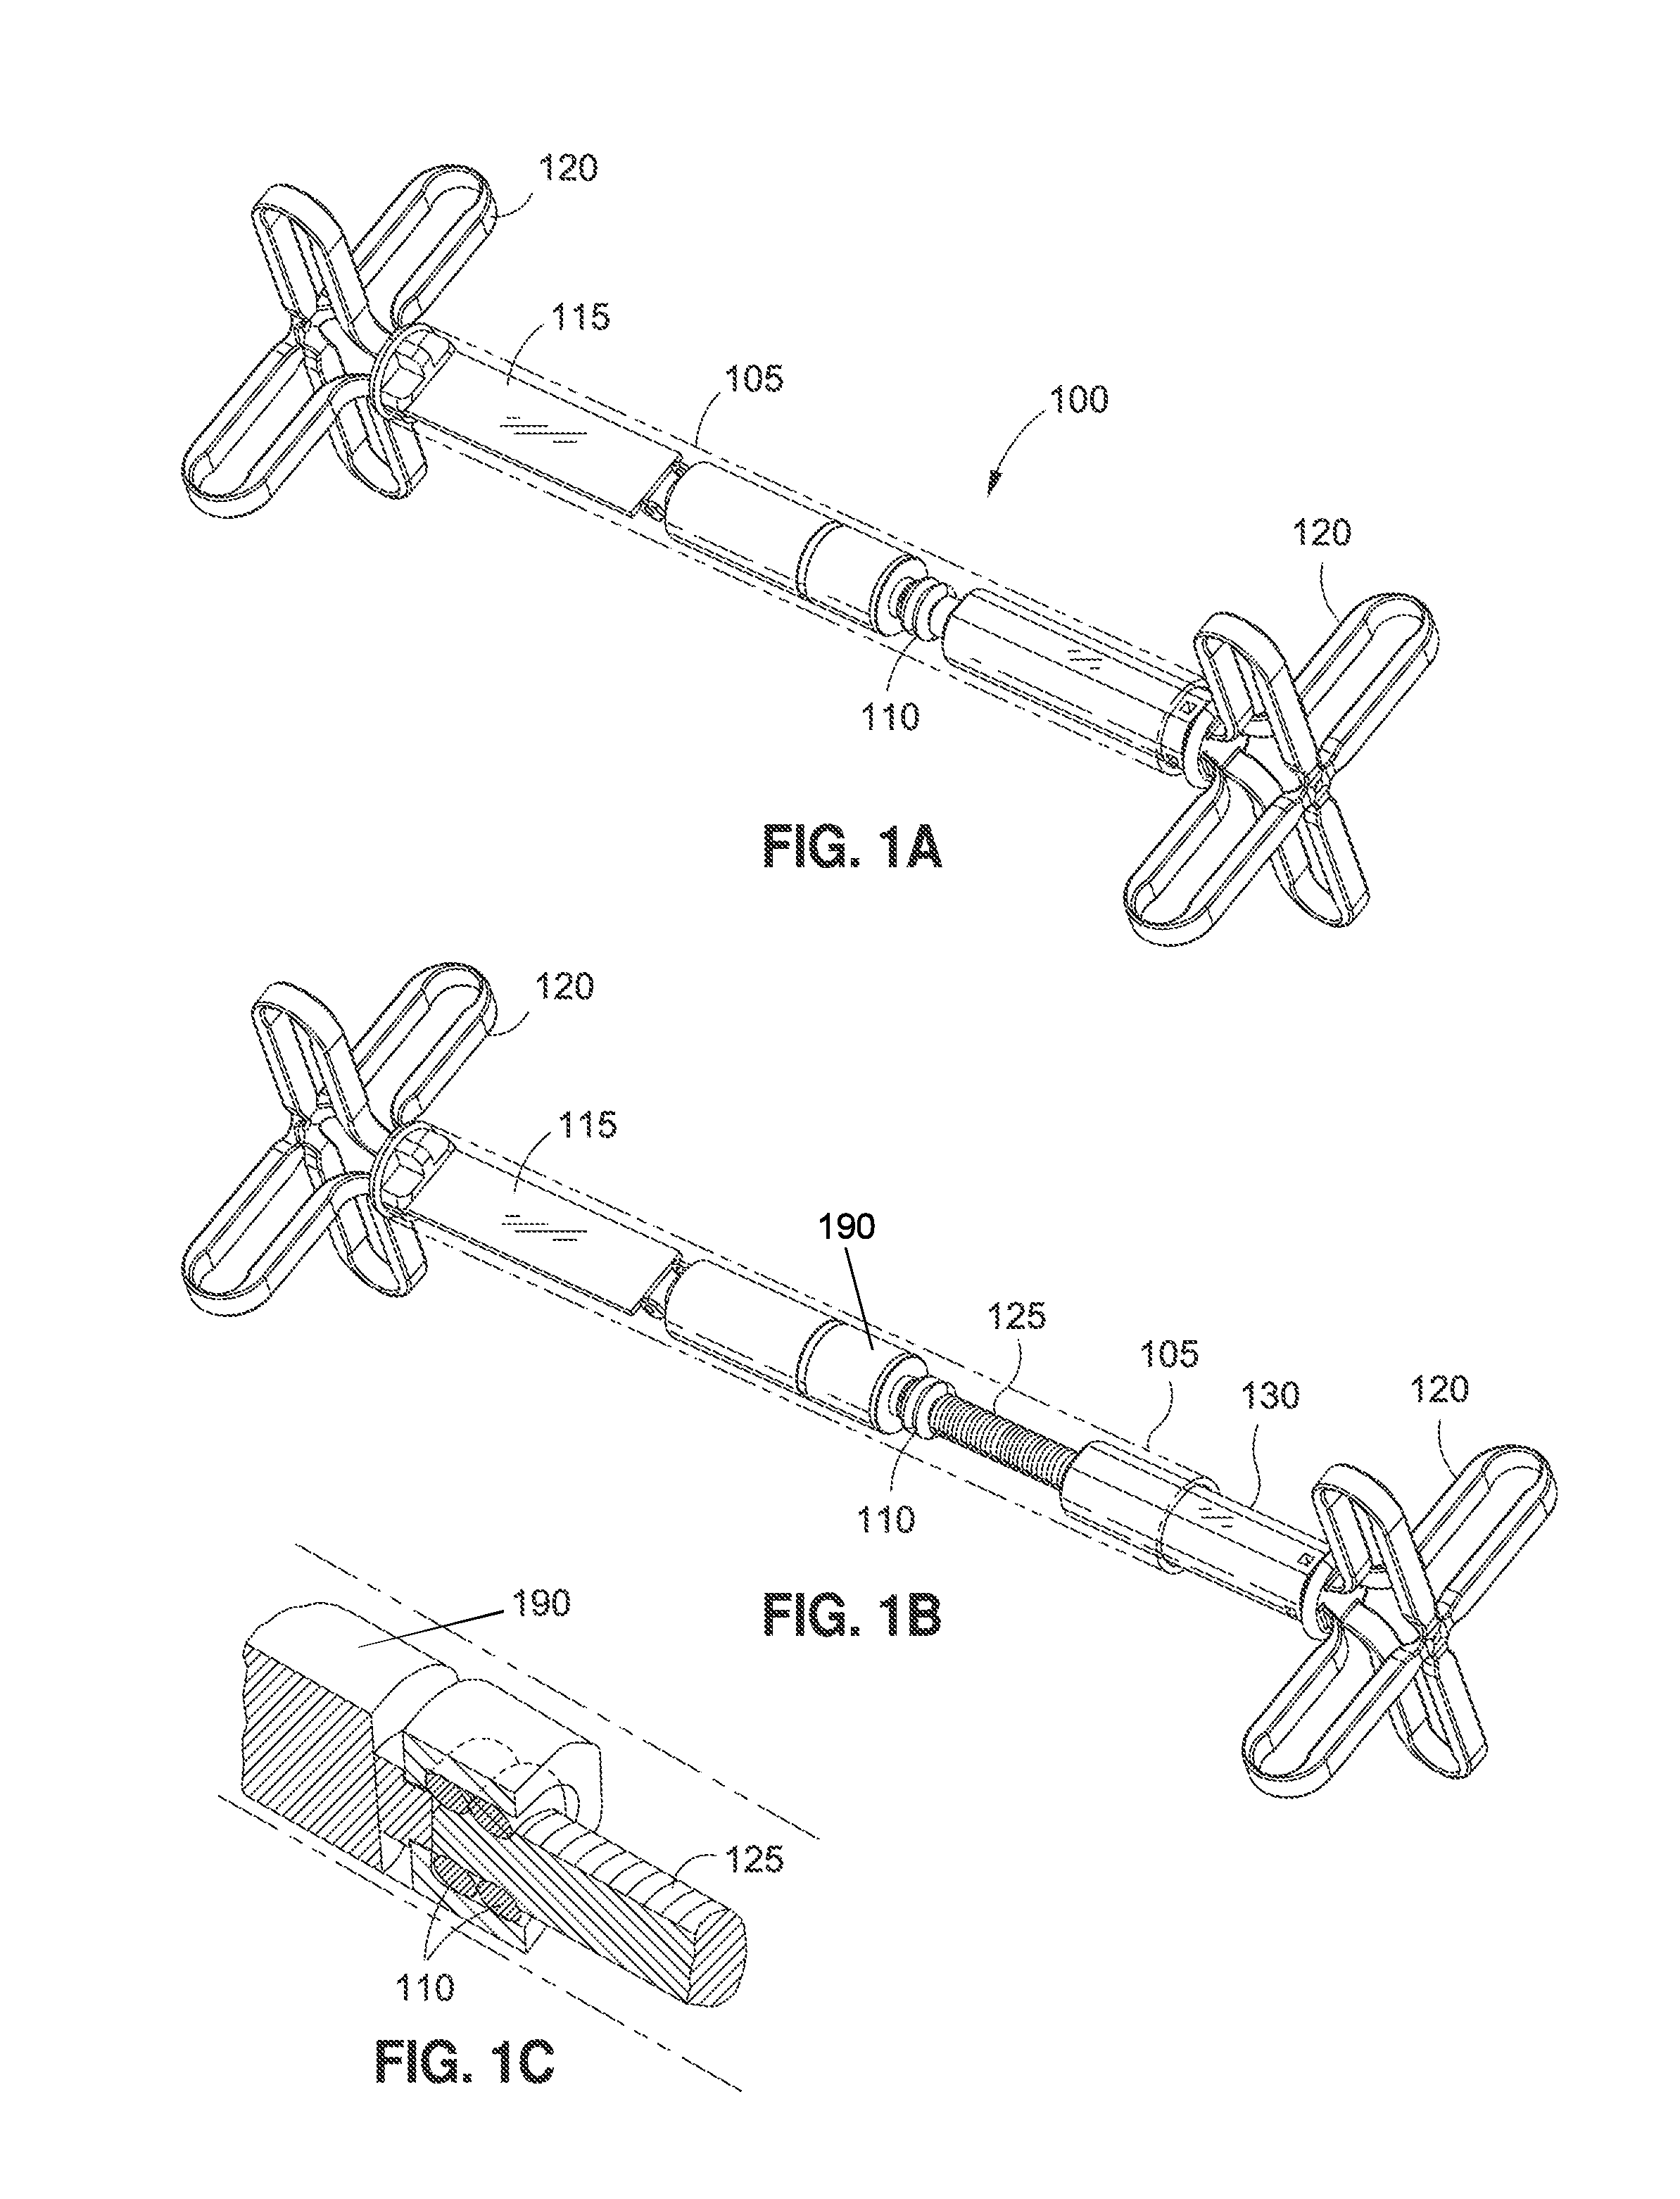 Variable size intragastric implant devices